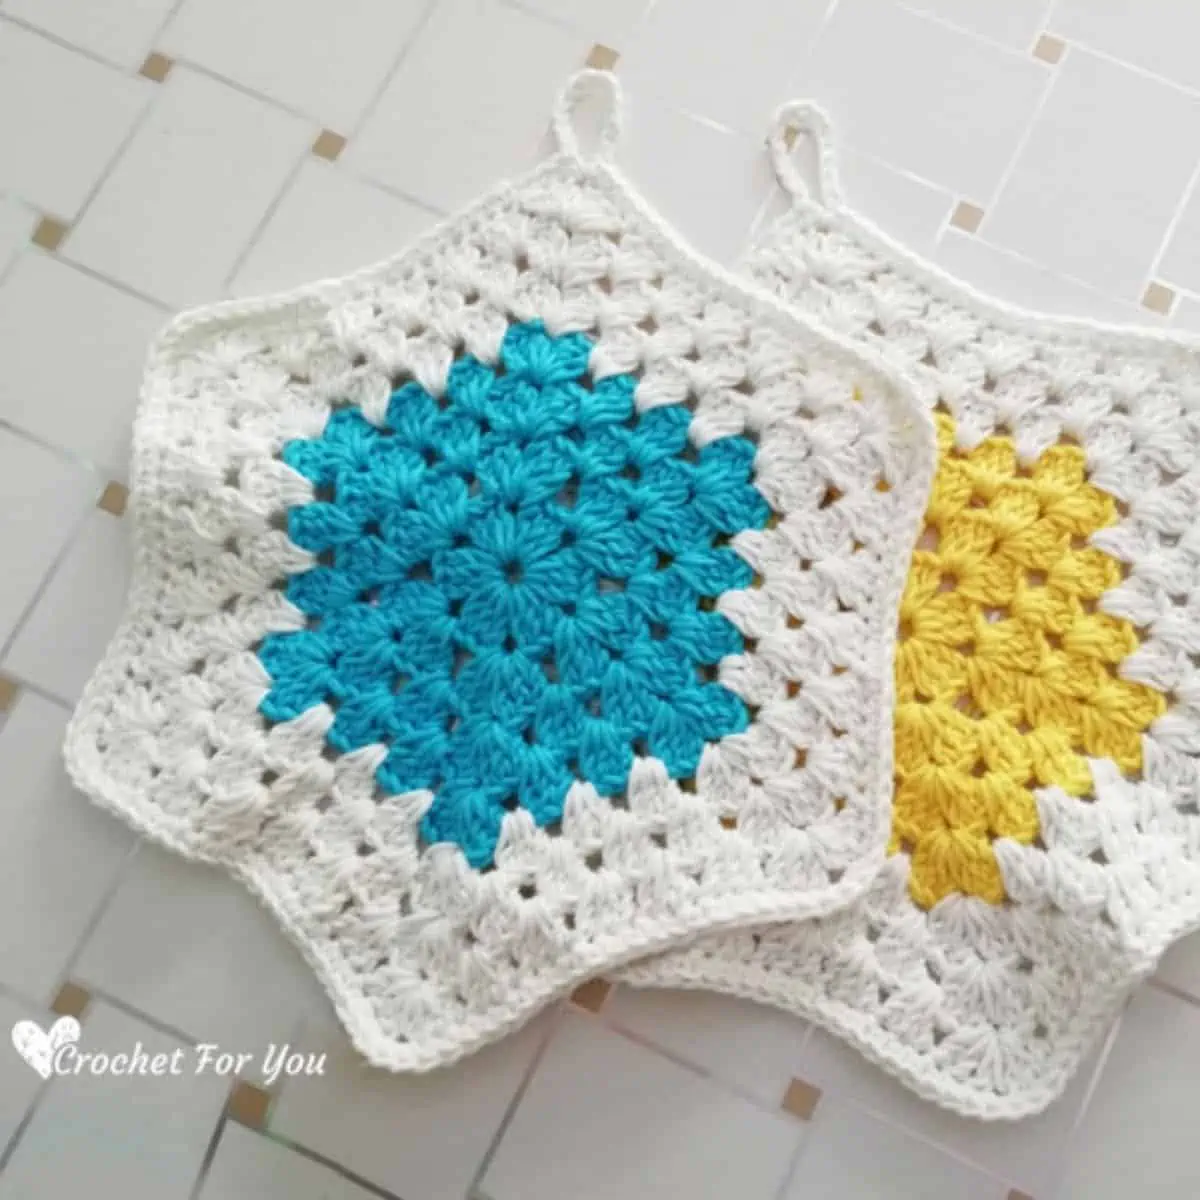 two crochet hexagon potholders one with a yellow center and one with a blue center